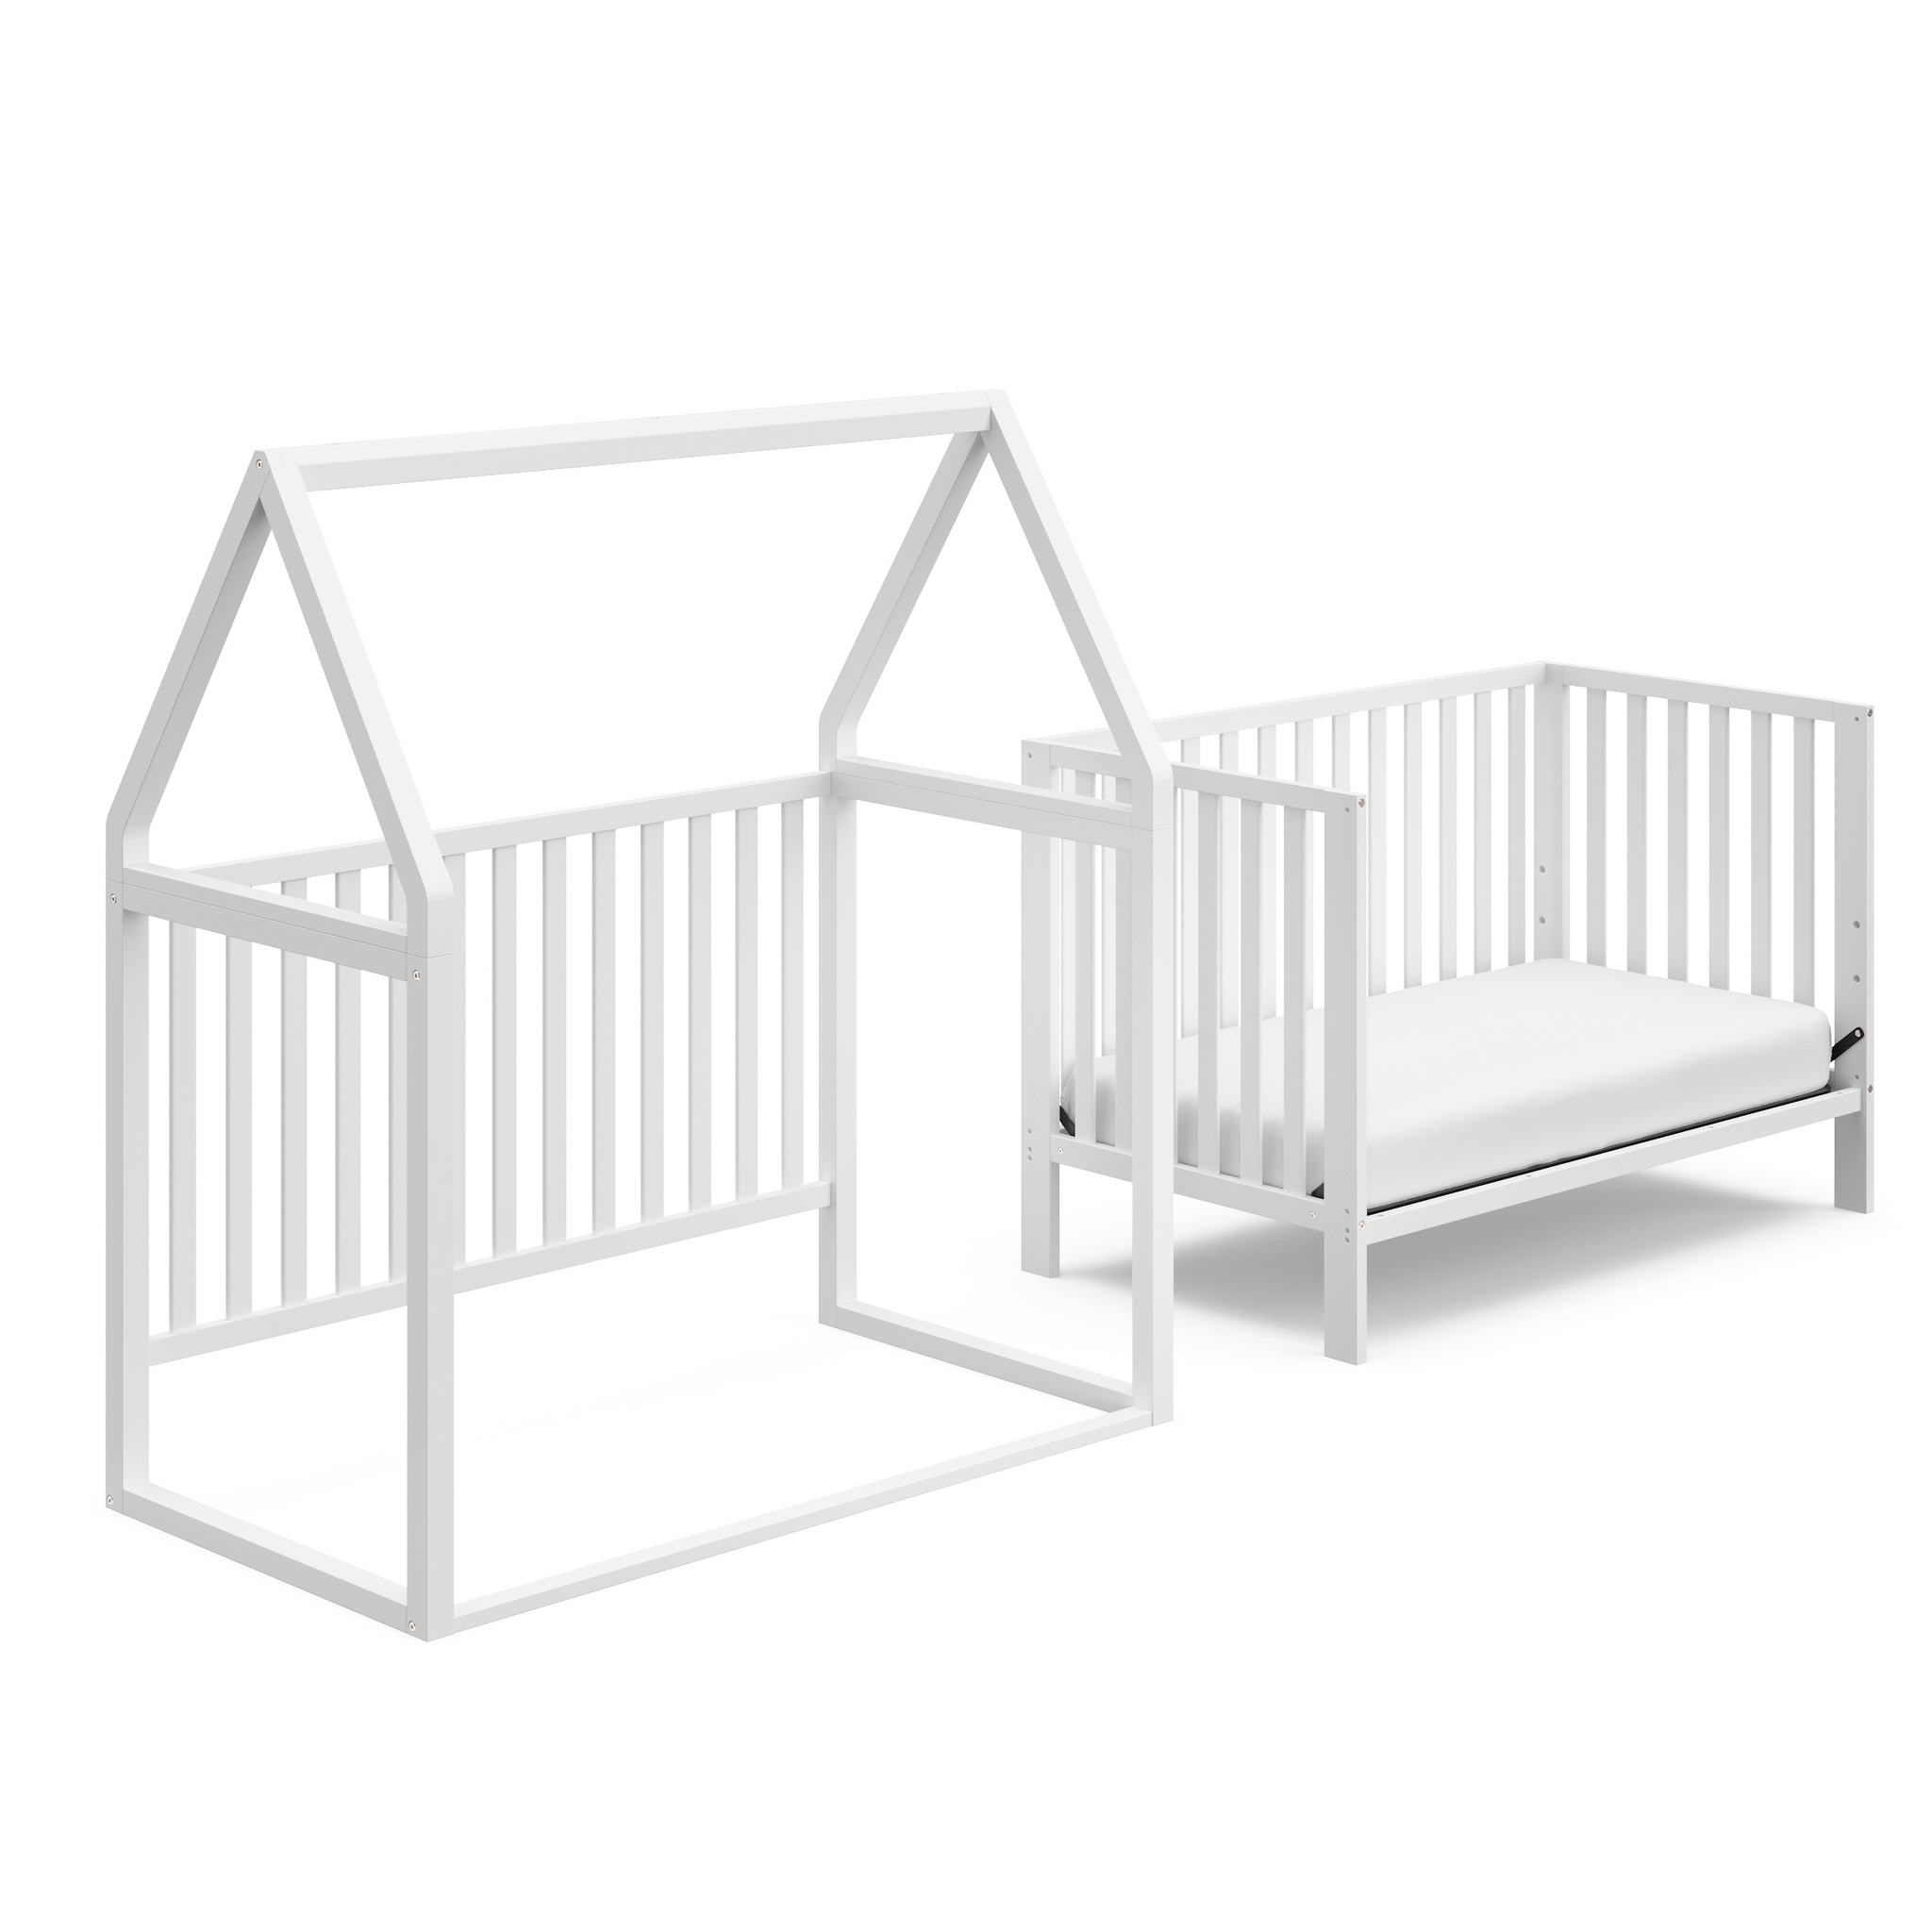 White crib with playhouse and crib conversion